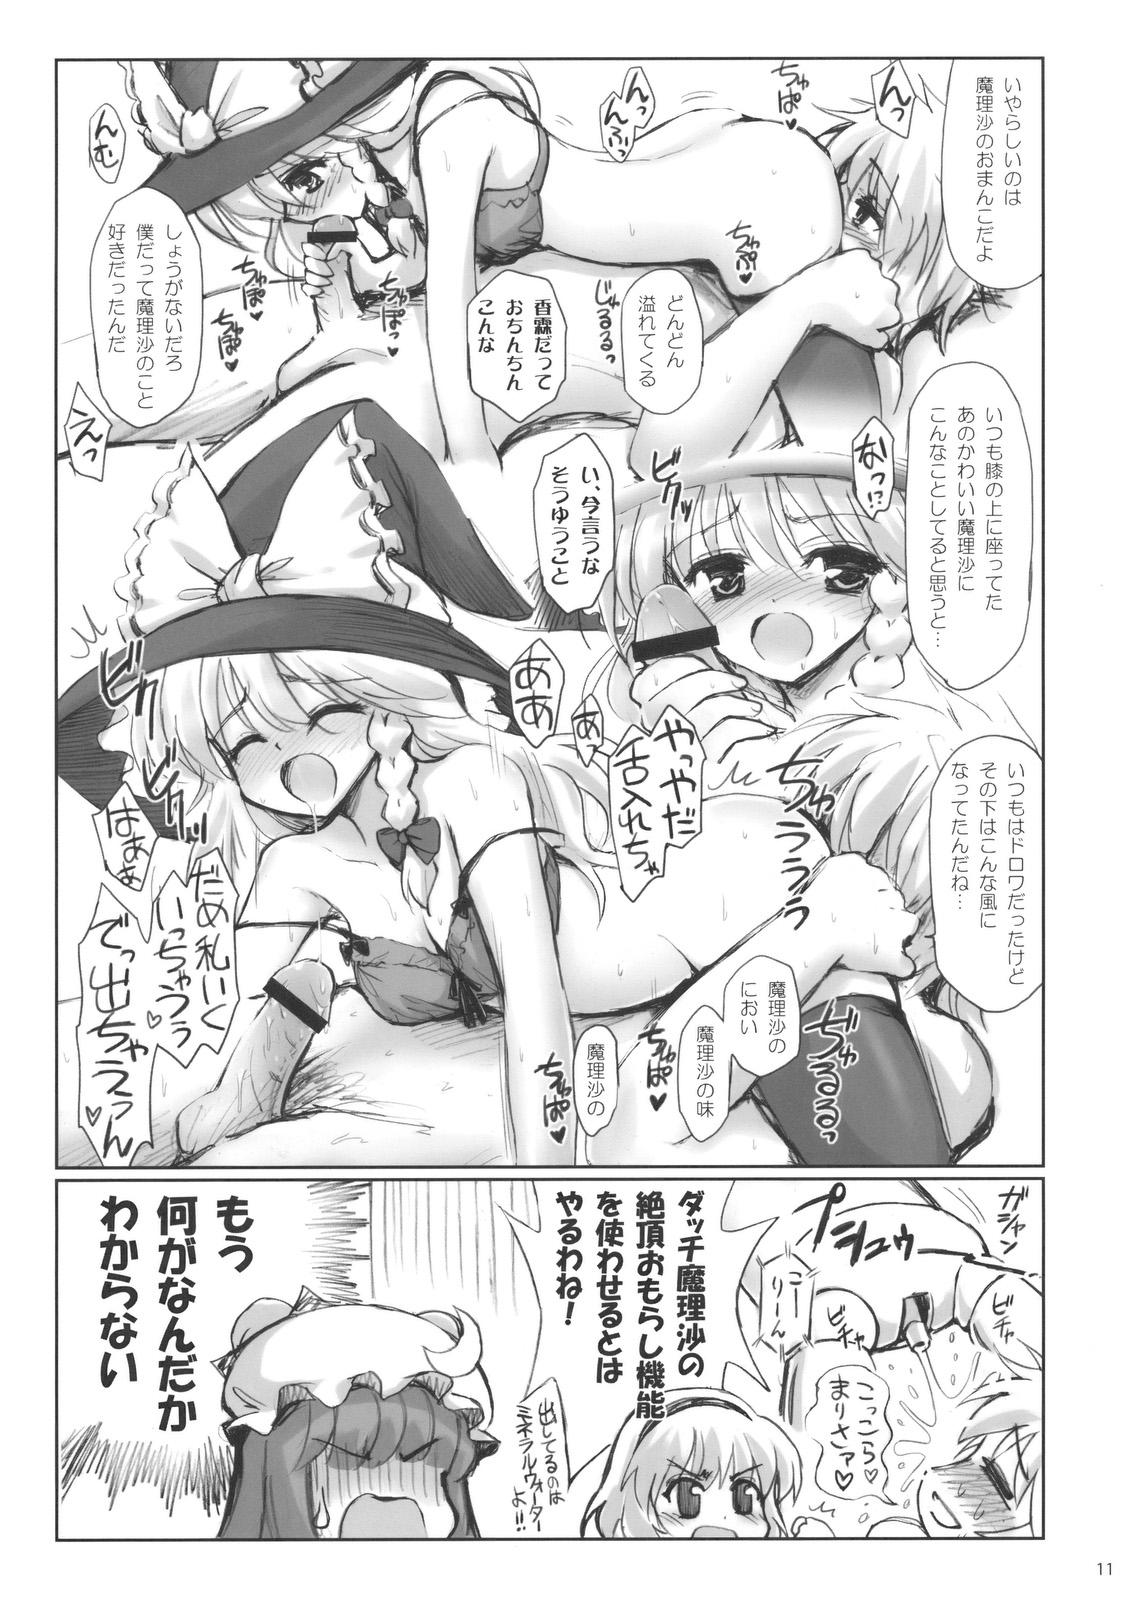 Seduction Porn ALICE IN NIGHTMARE - Touhou project Fit - Page 11